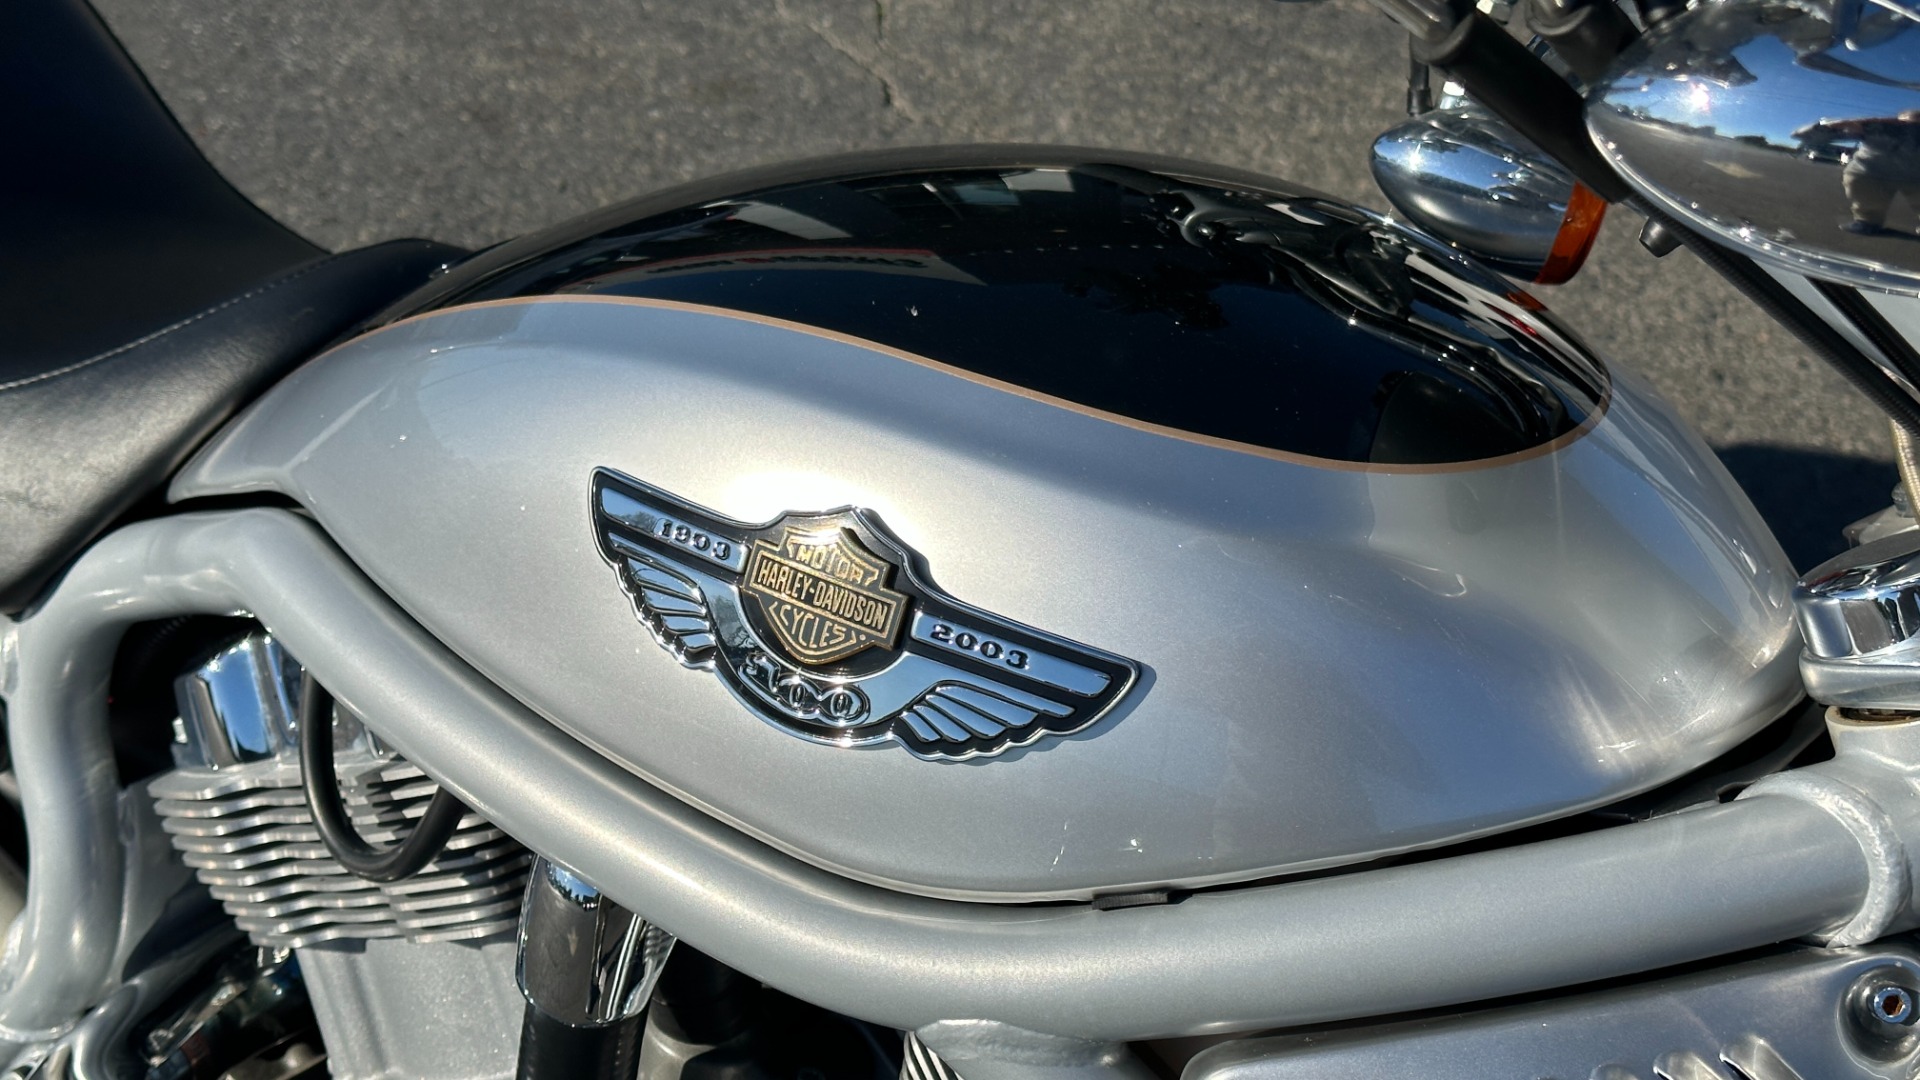 Used 2003 Harley Davidson V Rod ANNIVERSARY EDITION / 1130CC ENGINE / BREMBO BRAKES / VORTEX AIR SCOOPS for sale $7,695 at Formula Imports in Charlotte NC 28227 20